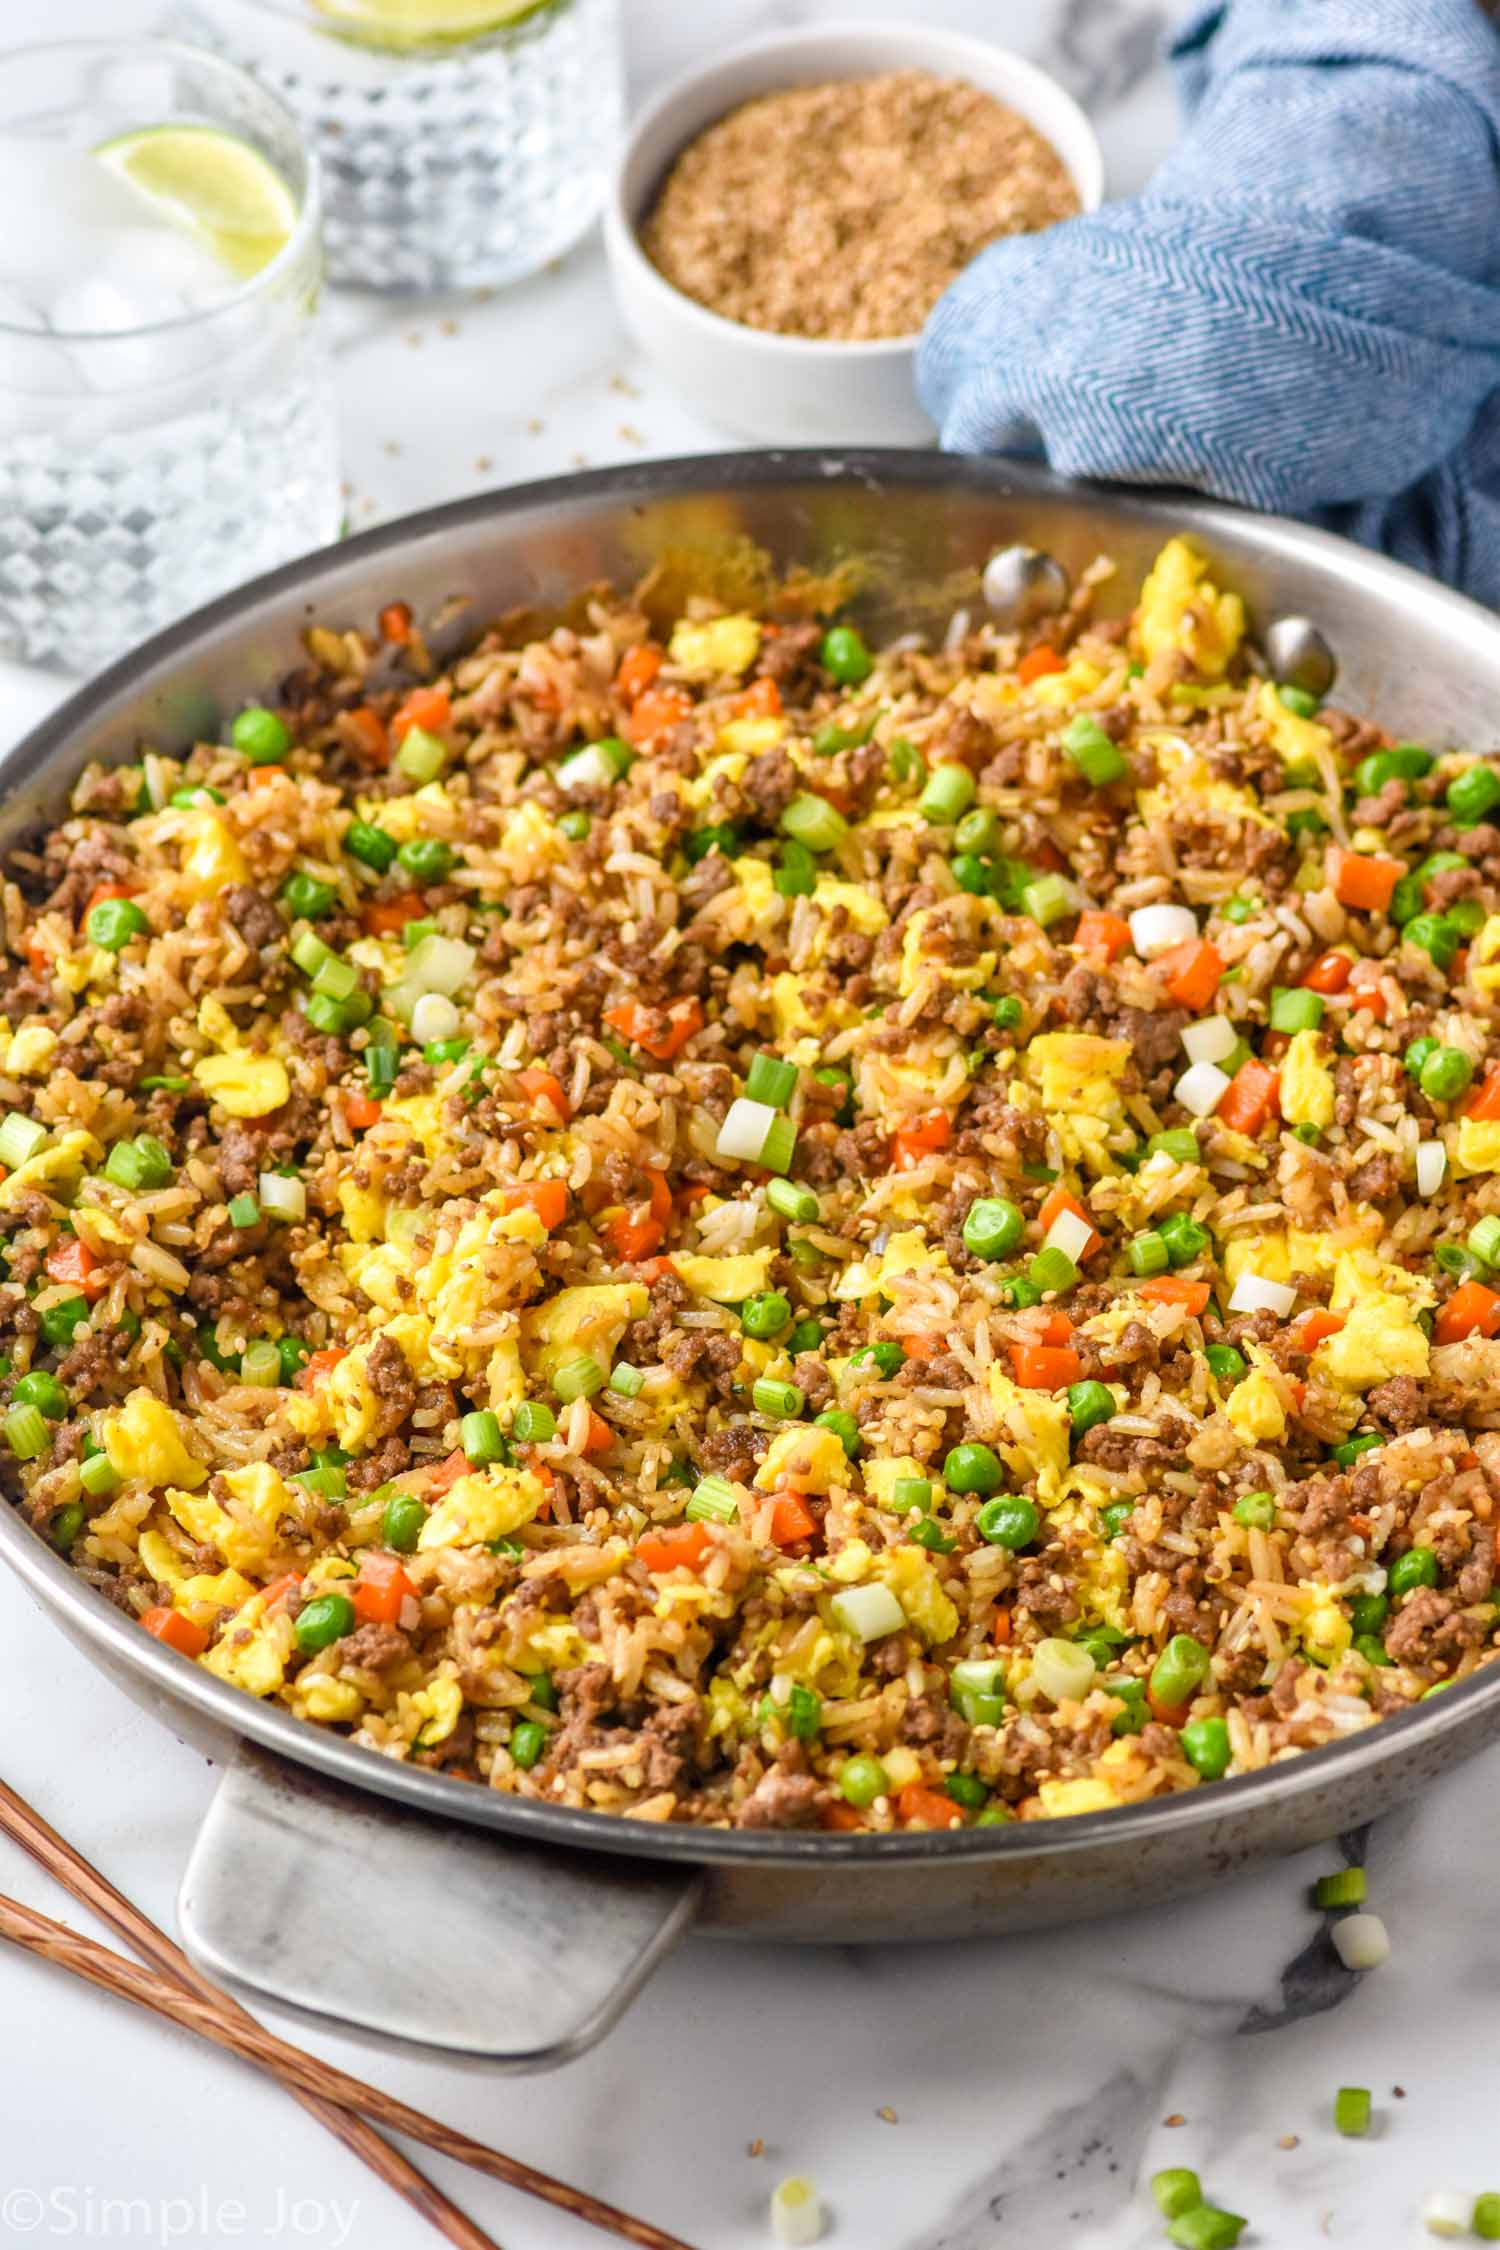 Skillet of Beef Fried Rice